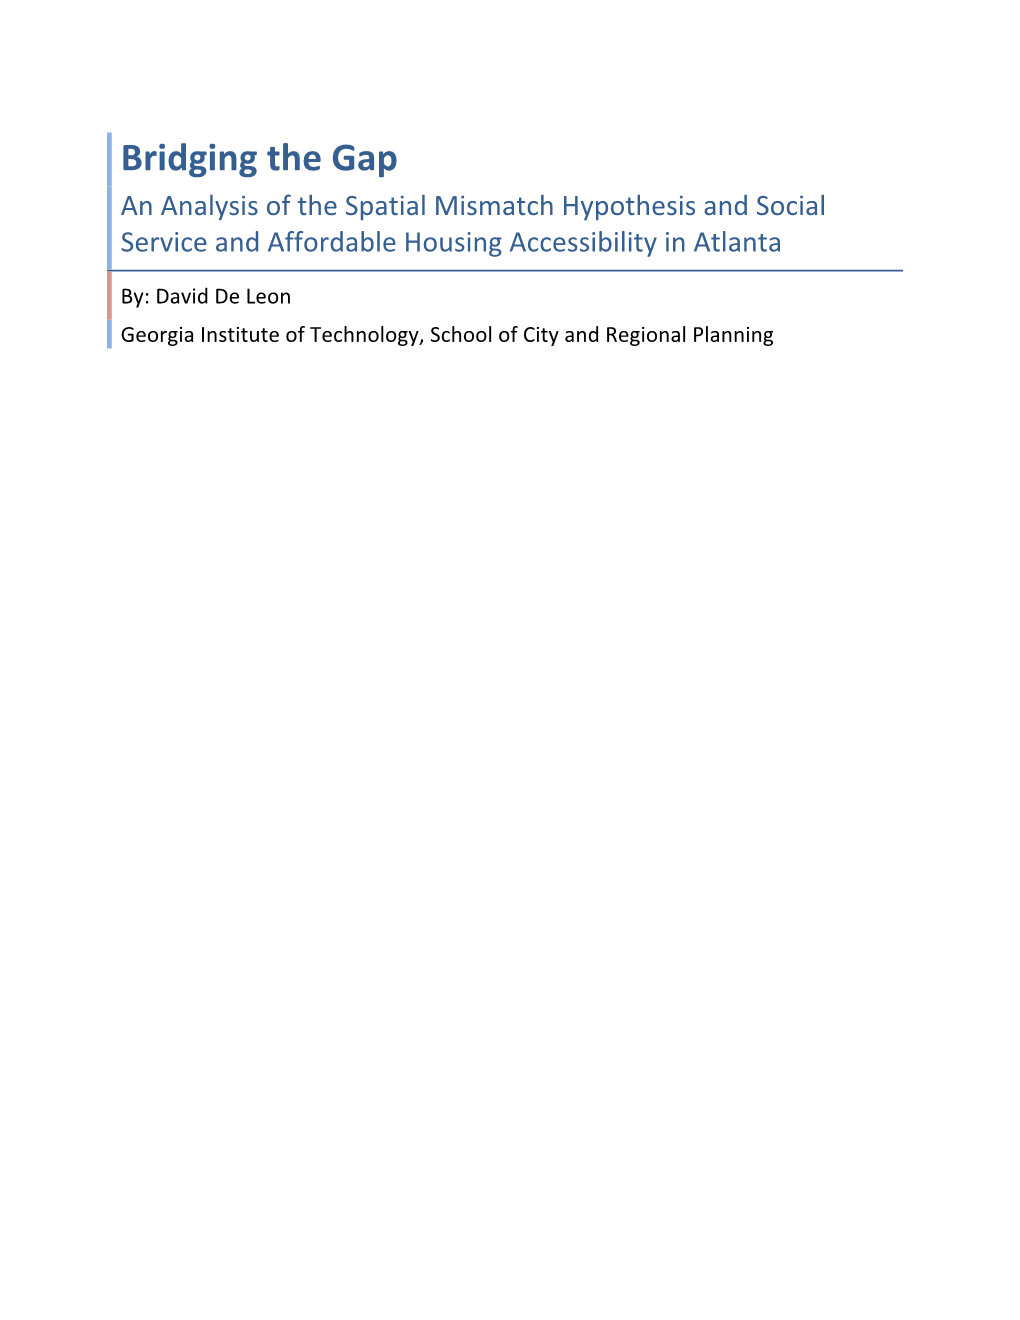 Bridging the Gap an Analysis of the Spatial Mismatch Hypothesis and Social Service and Affordable Housing Accessibility in Atlanta